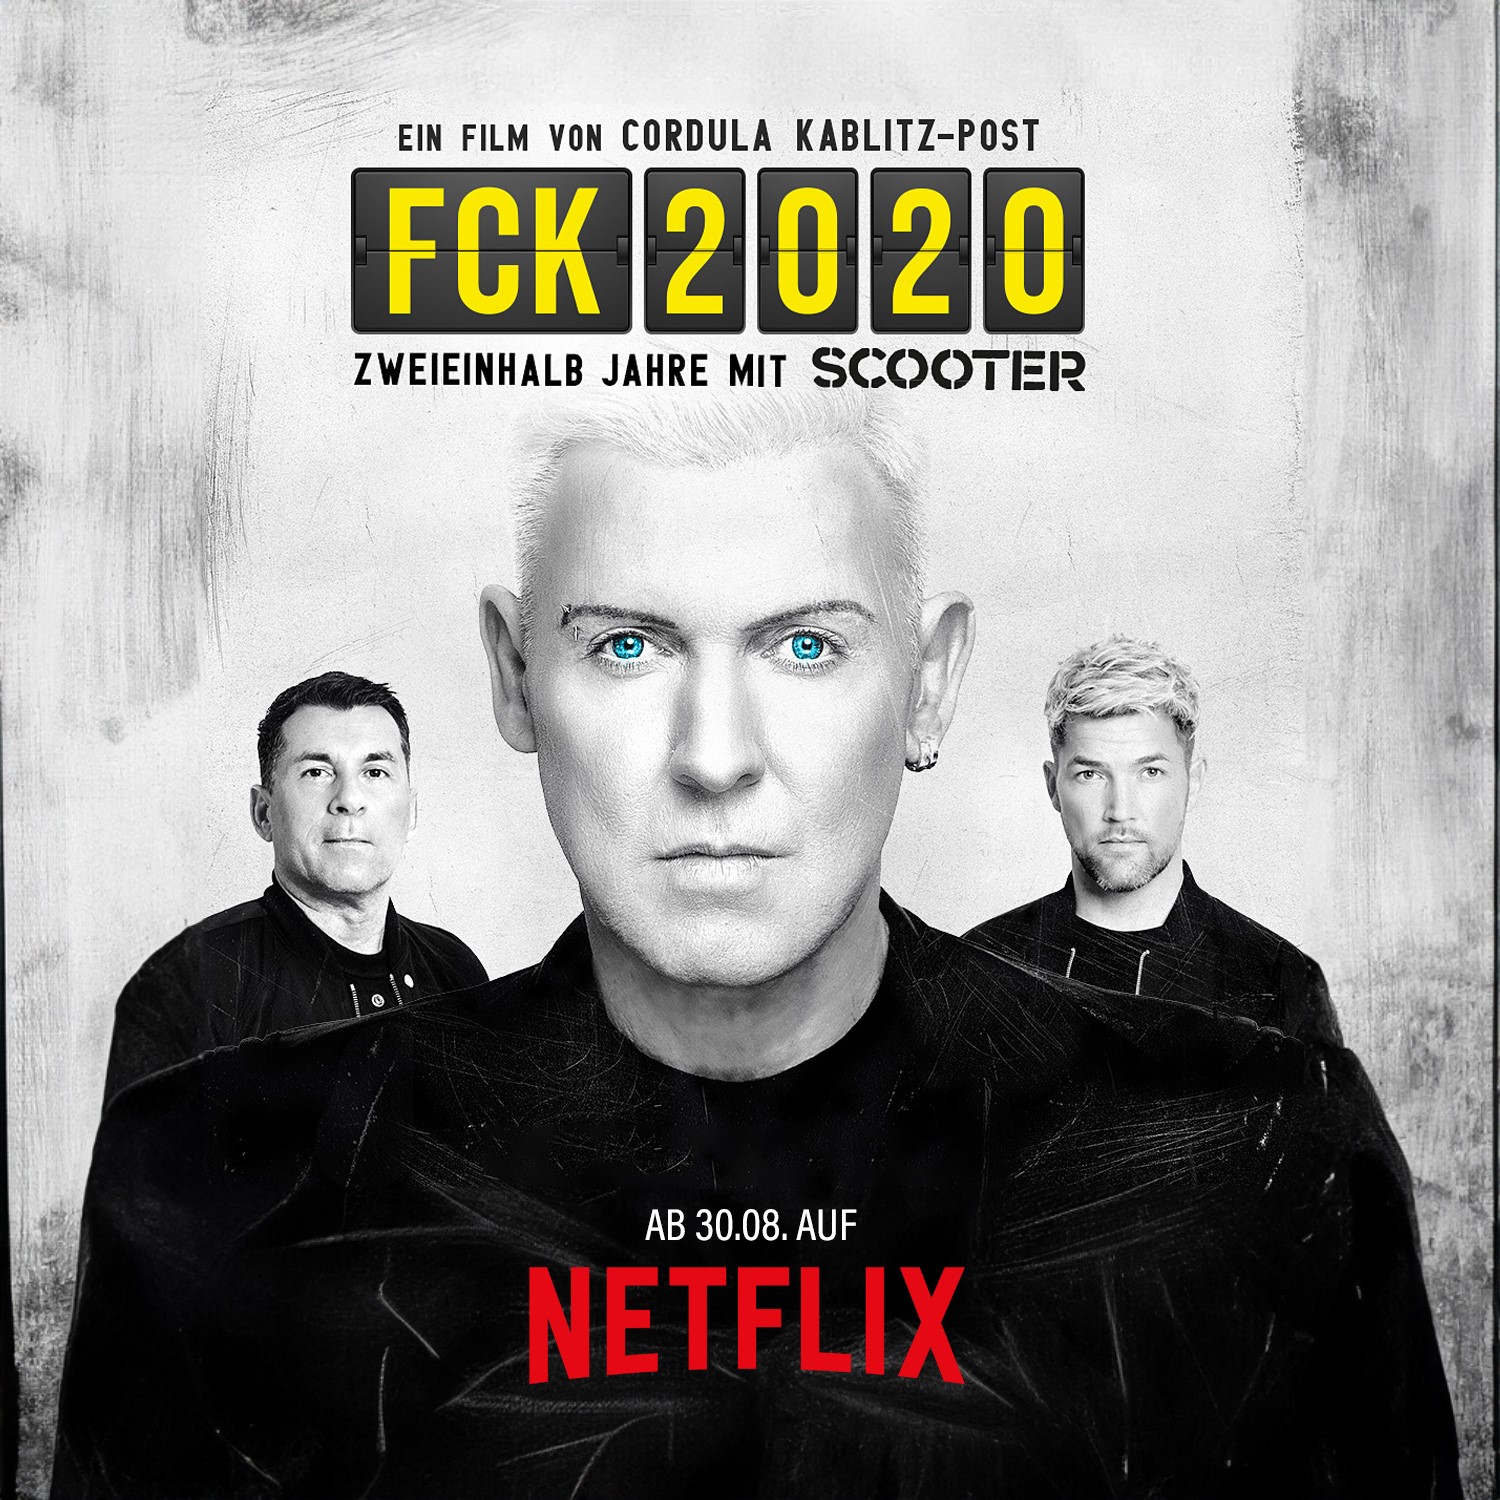 „FCK 2020 – 2 ½ YEARS WITH SCOOTER“ will be released on NETFLIX on 30th August.